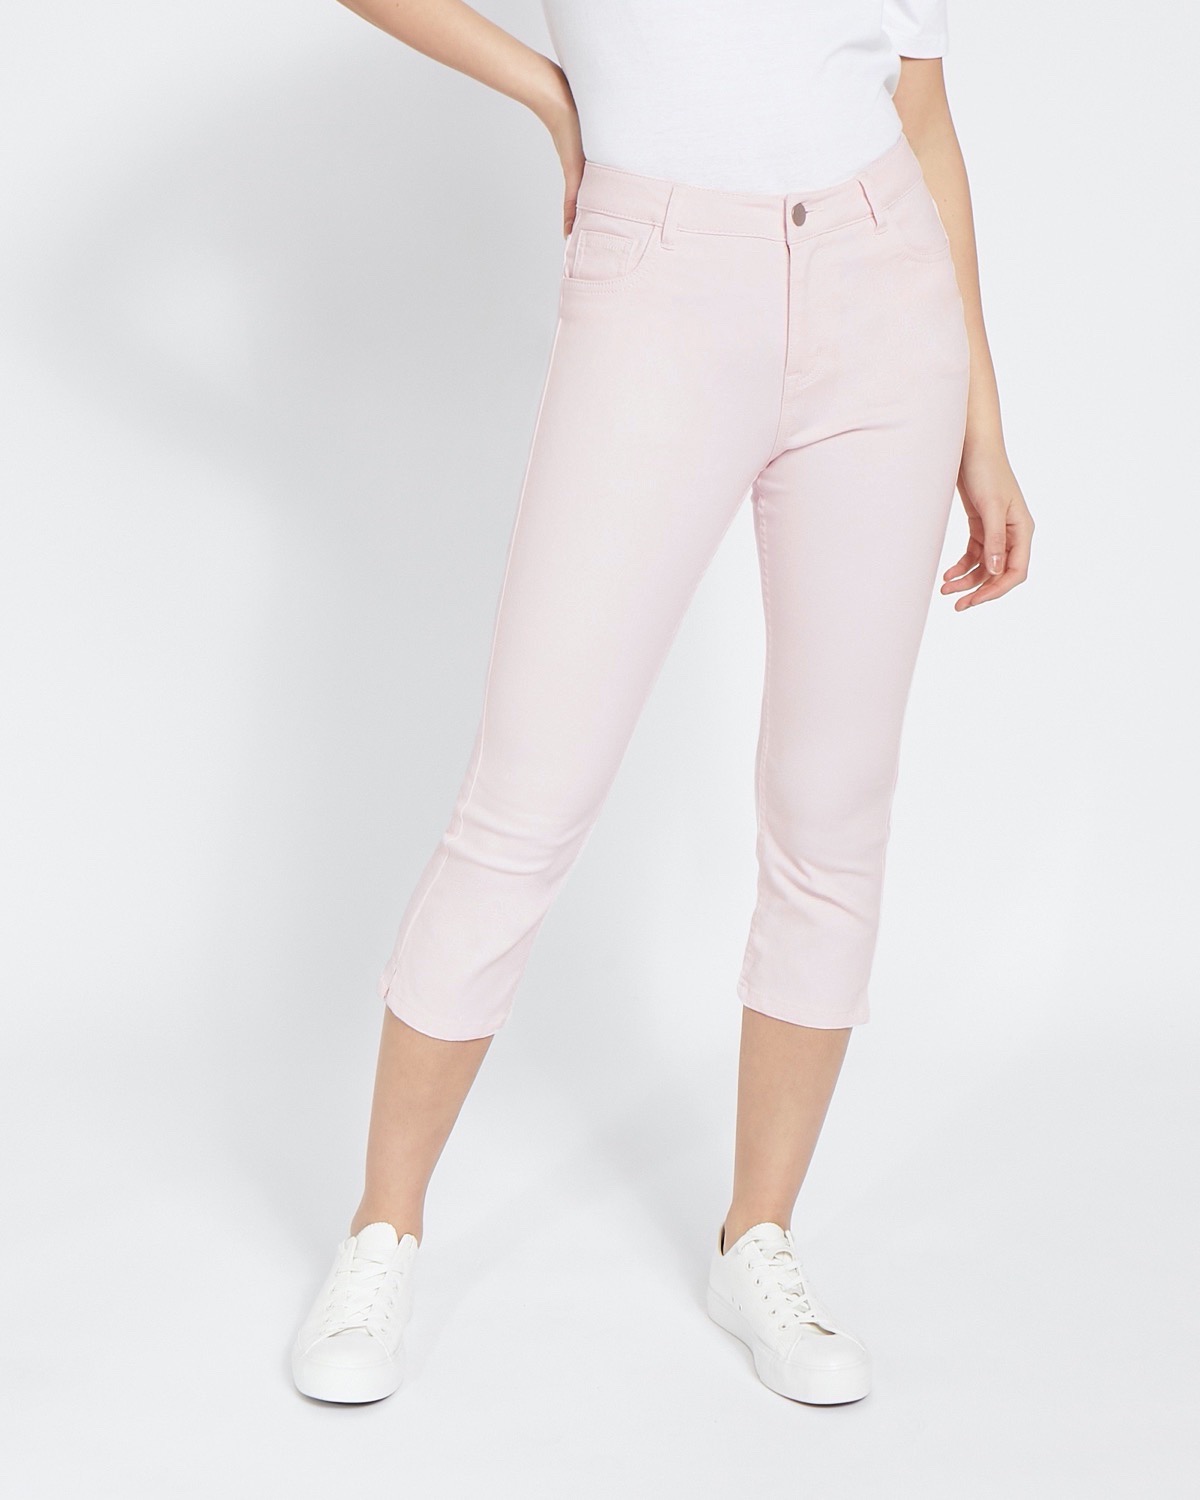 Women's Pink Jeans | Ladies Pink Skinny Jeans | Next Official Site